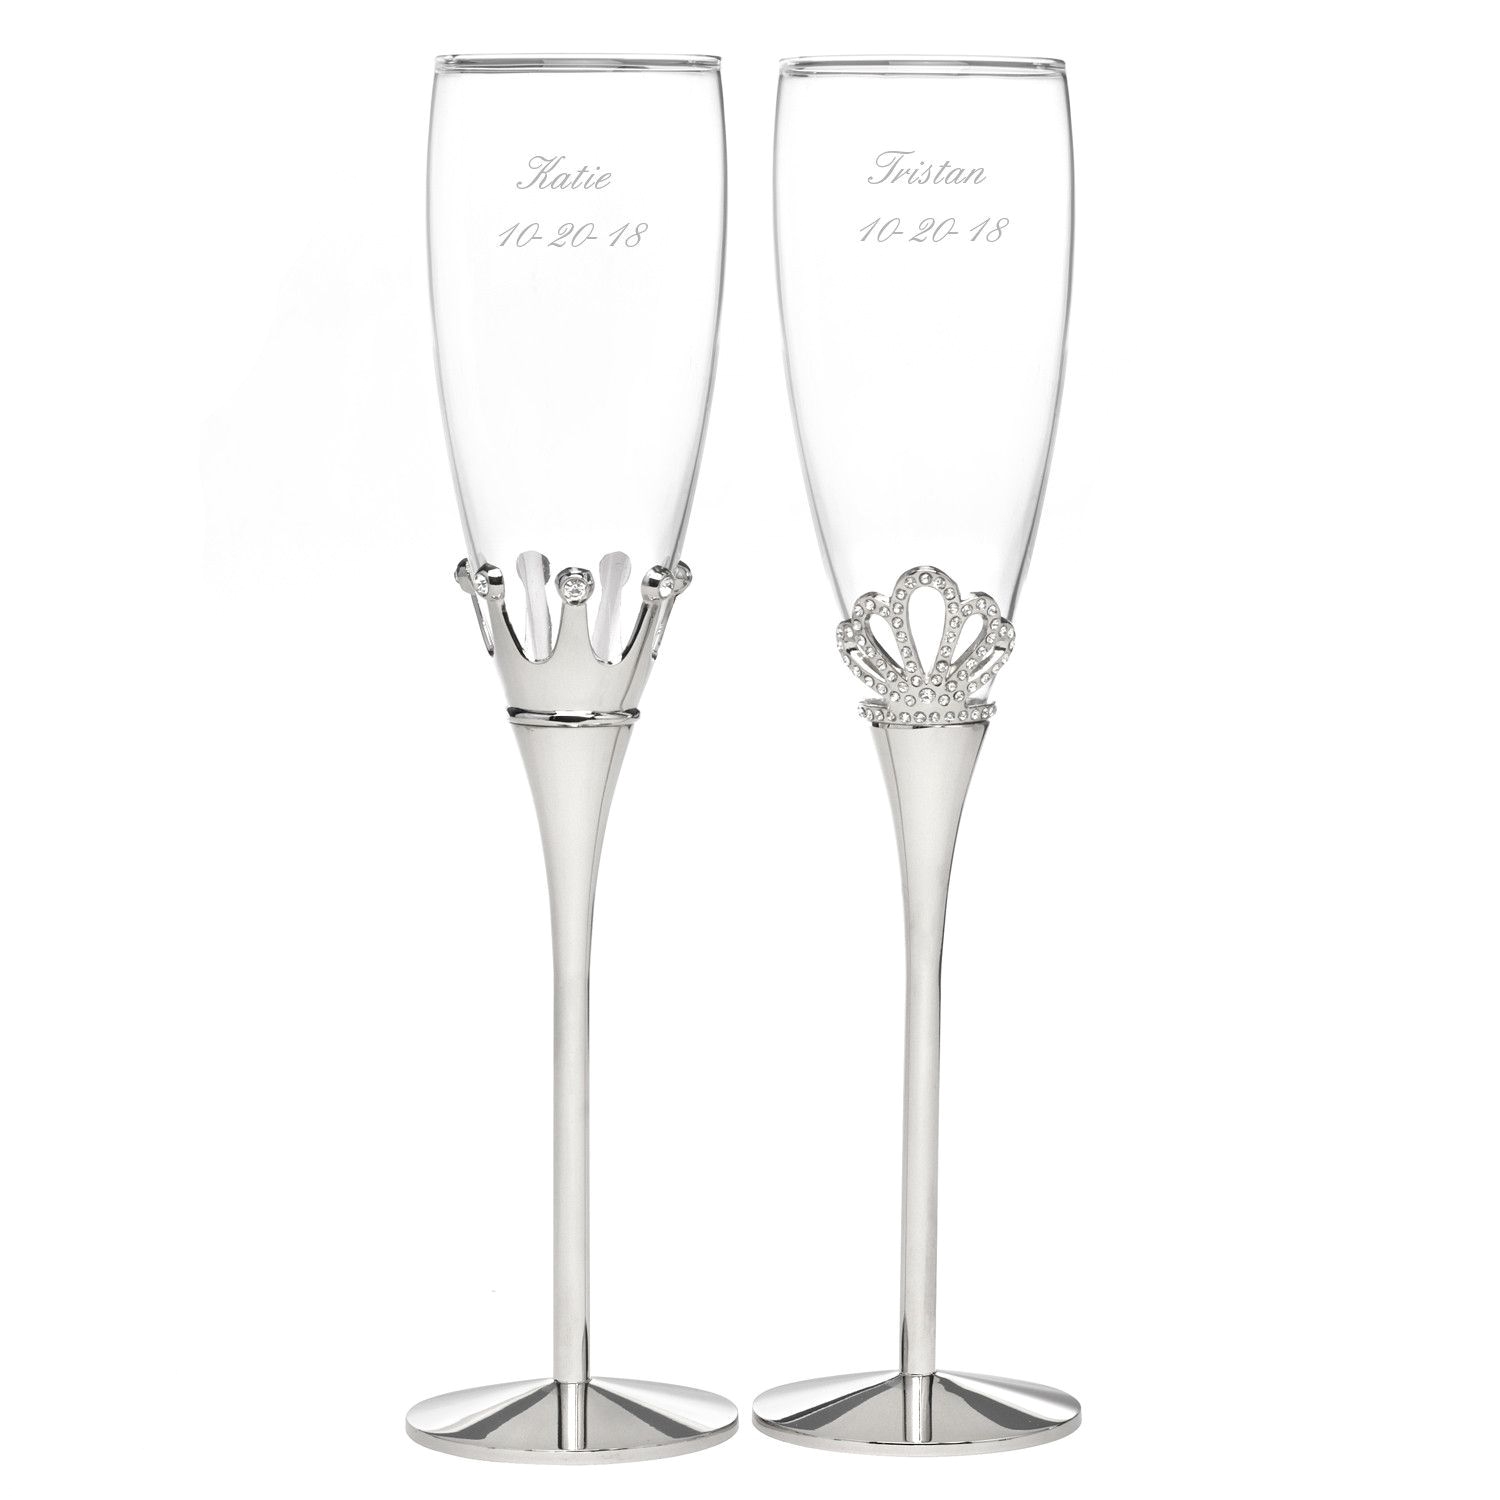 How to Decorate Champagne Glasses King and Queen Rhinestone Flute Glass Set Wedding Champagne